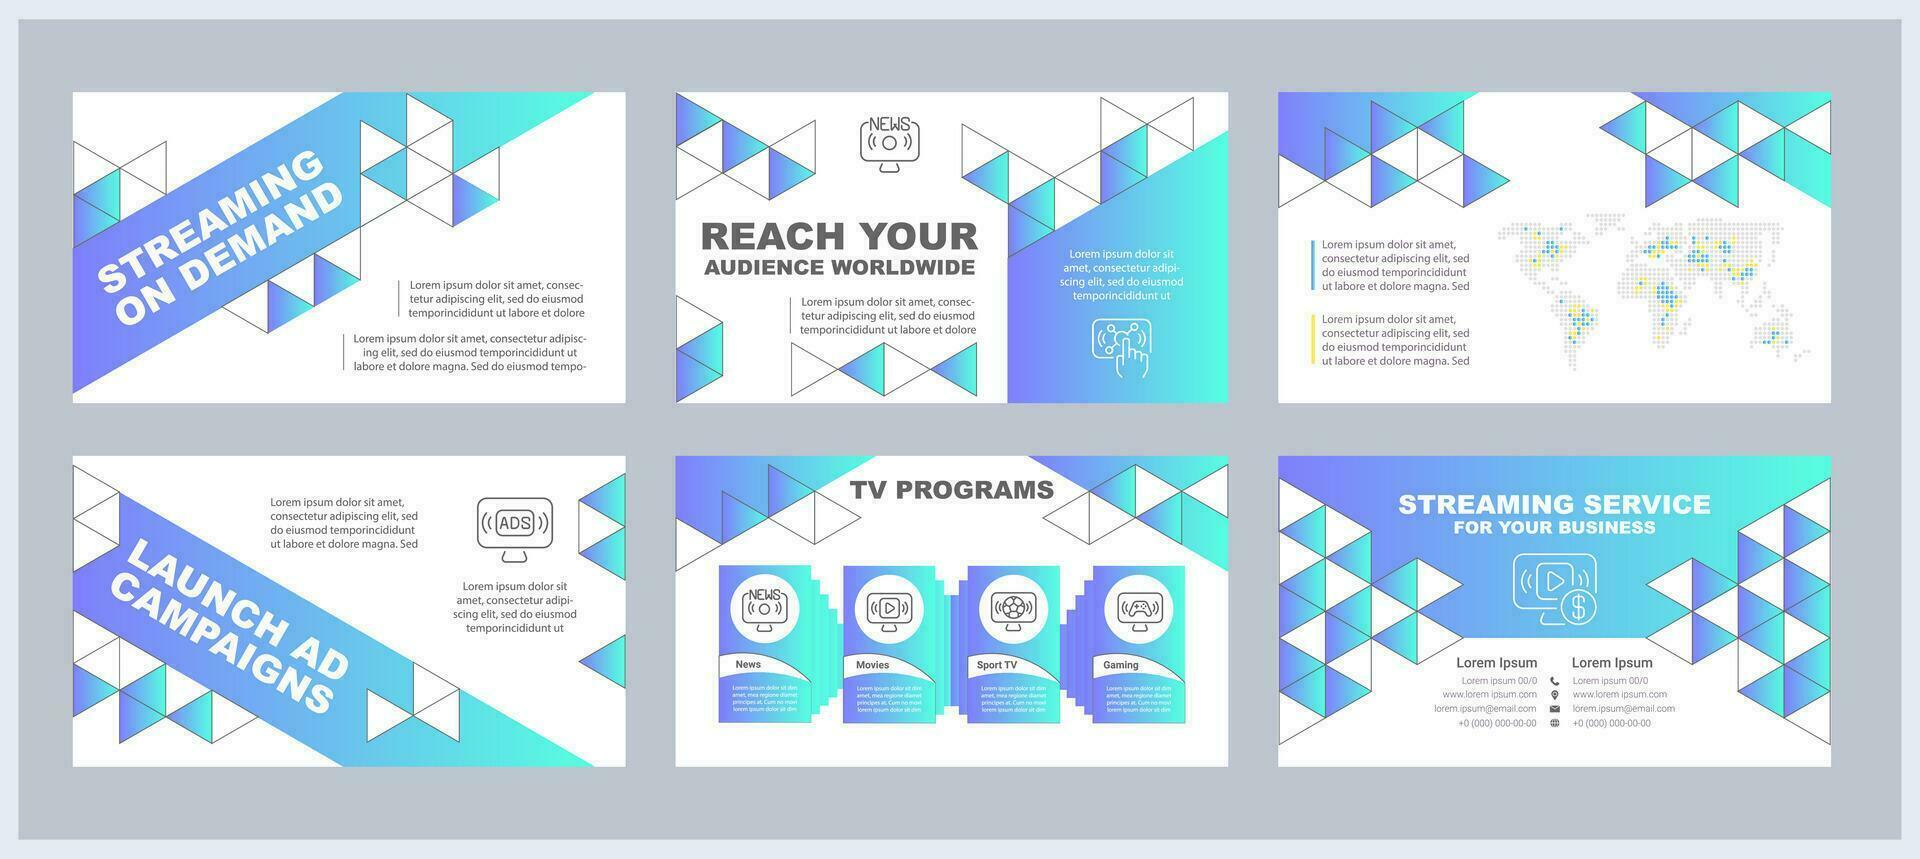 Streaming on demand presentation templates set. Video content library. Subscription based. Internet TV. Ready made PPT slides on white background. Graphic design vector